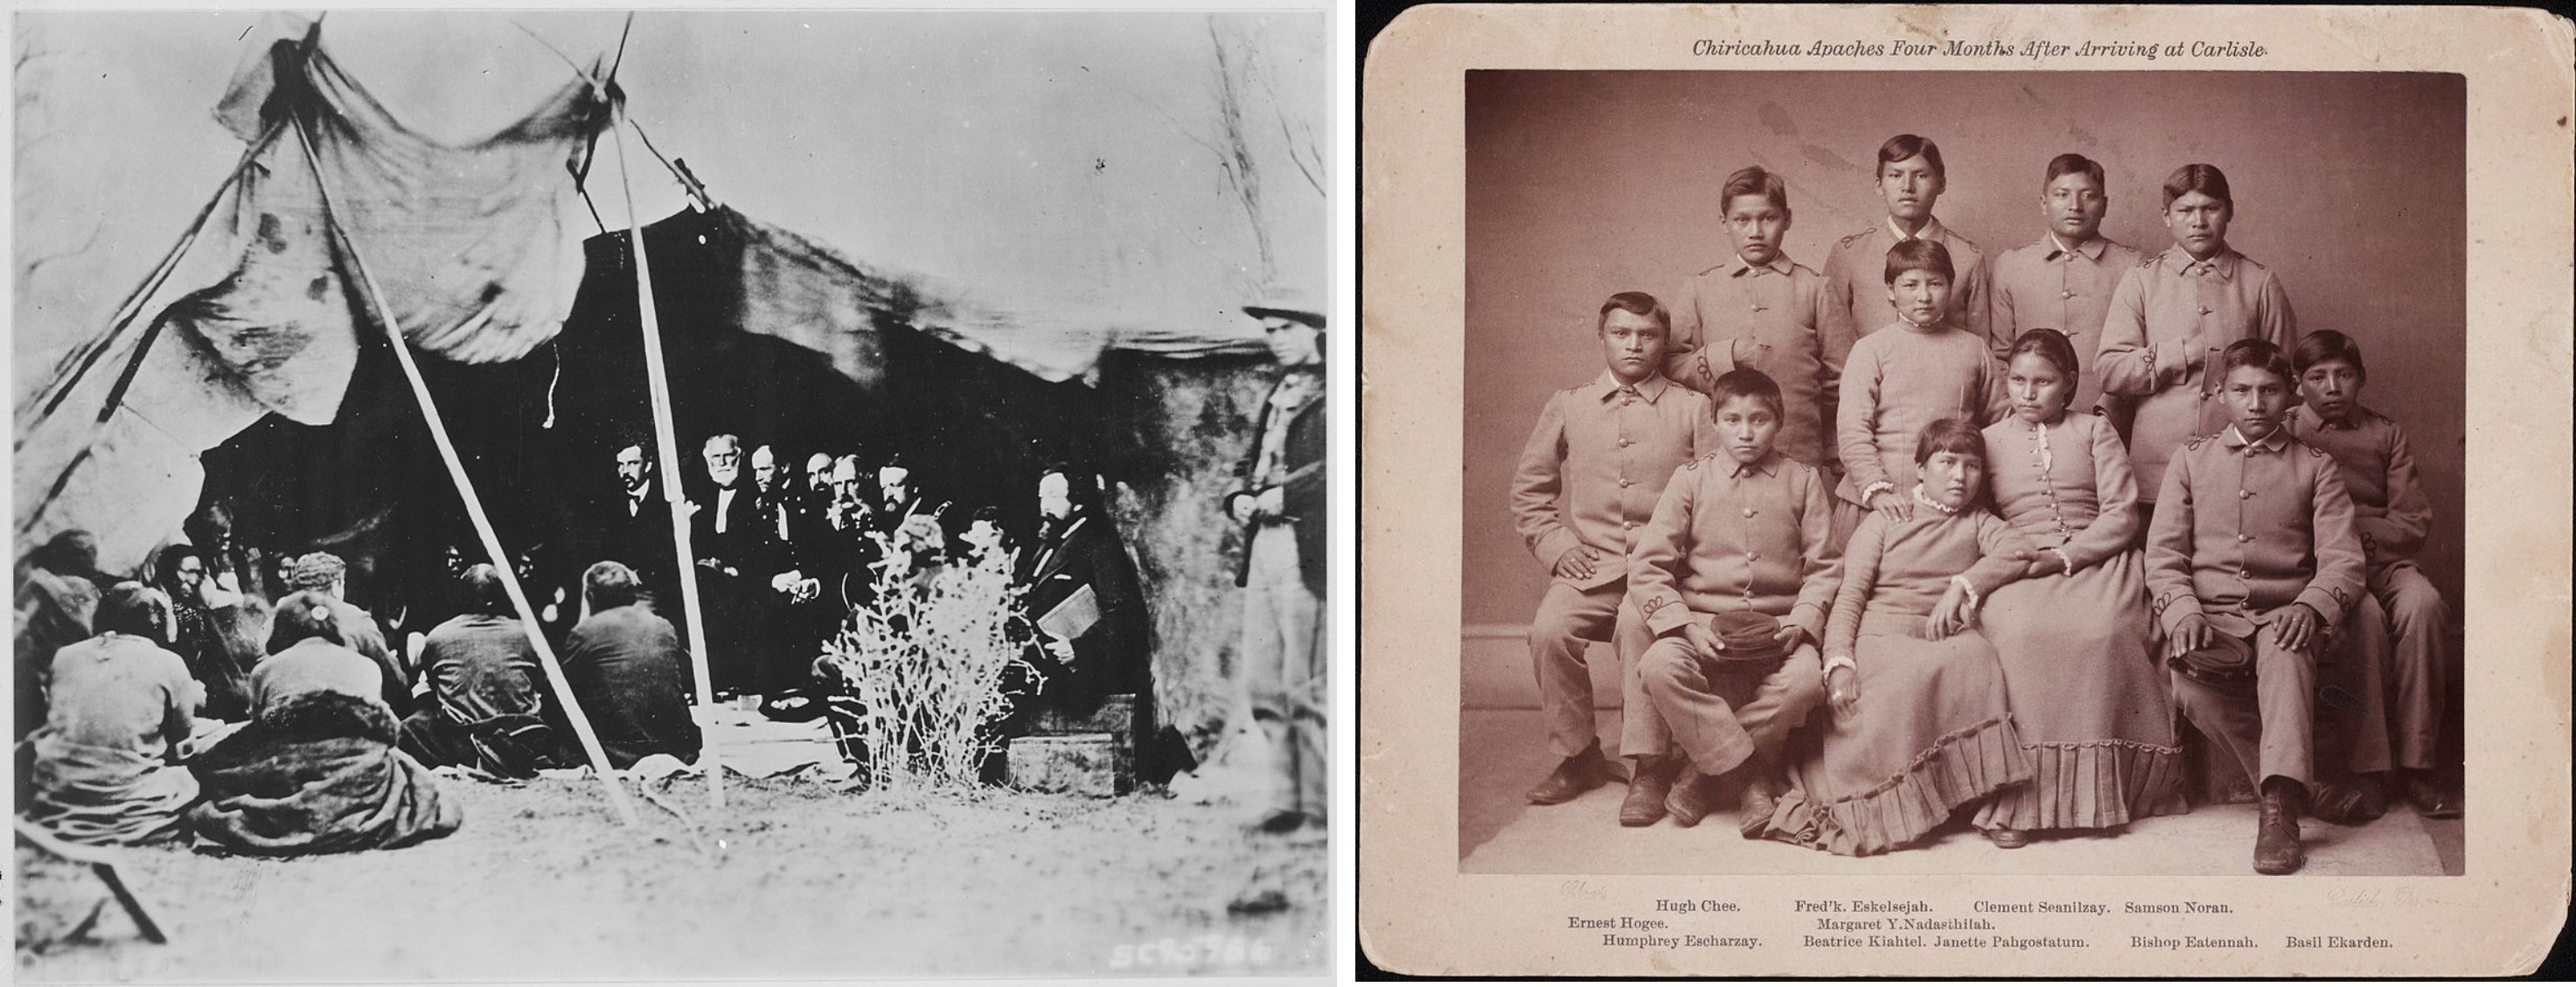 On the left, General William T. Sherman meeting with Indian Chiefs. On the right, Apache children at the Carlisle boarding school.